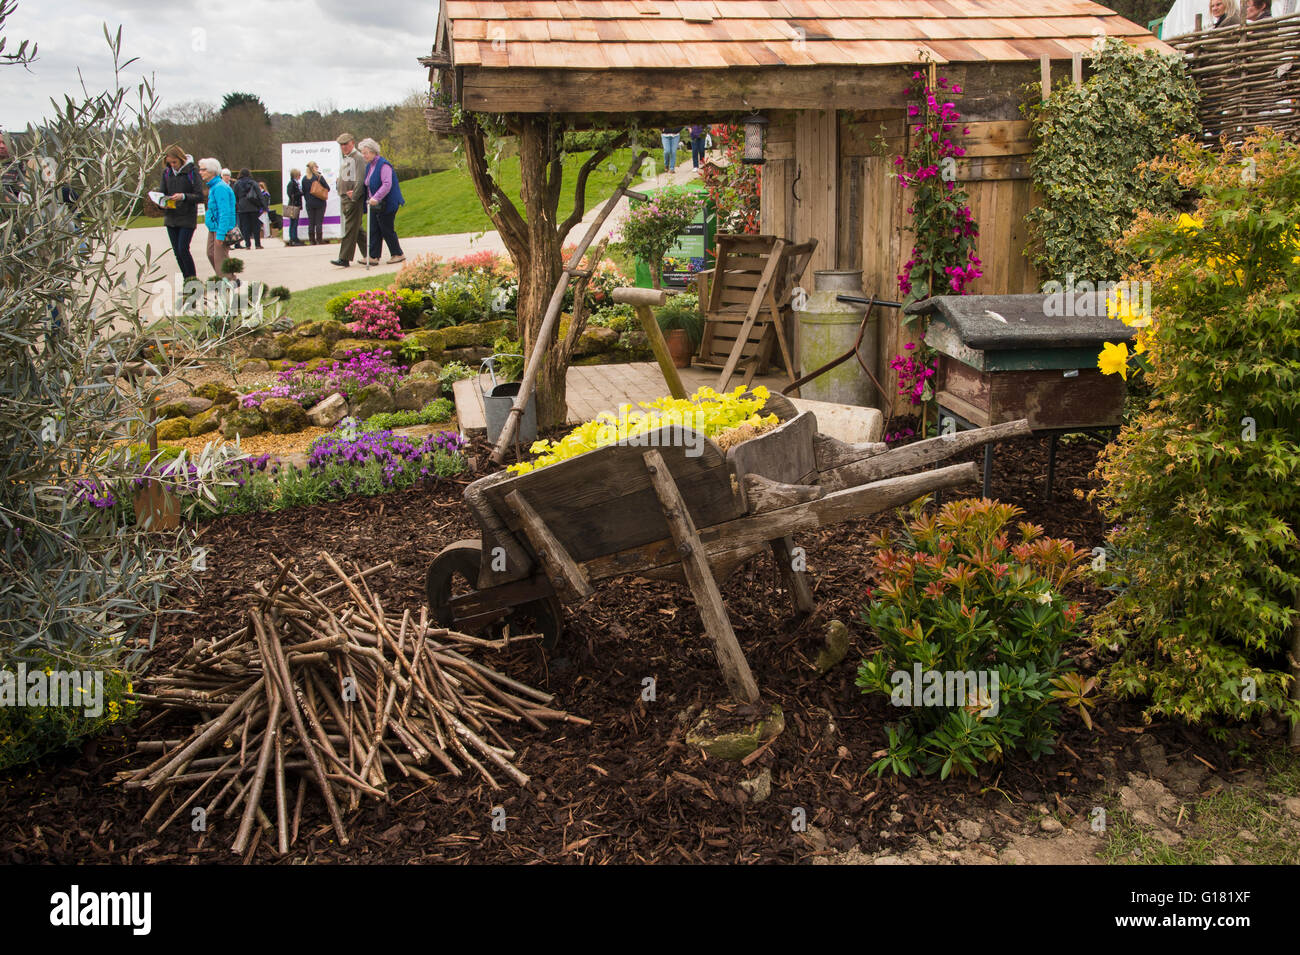 Visitors to Harrogate Spring Flower Show 2016 (North Yorkshire, England) pass a rustic shed and natural planting in 'Wildlife Paradise' show garden. Stock Photo